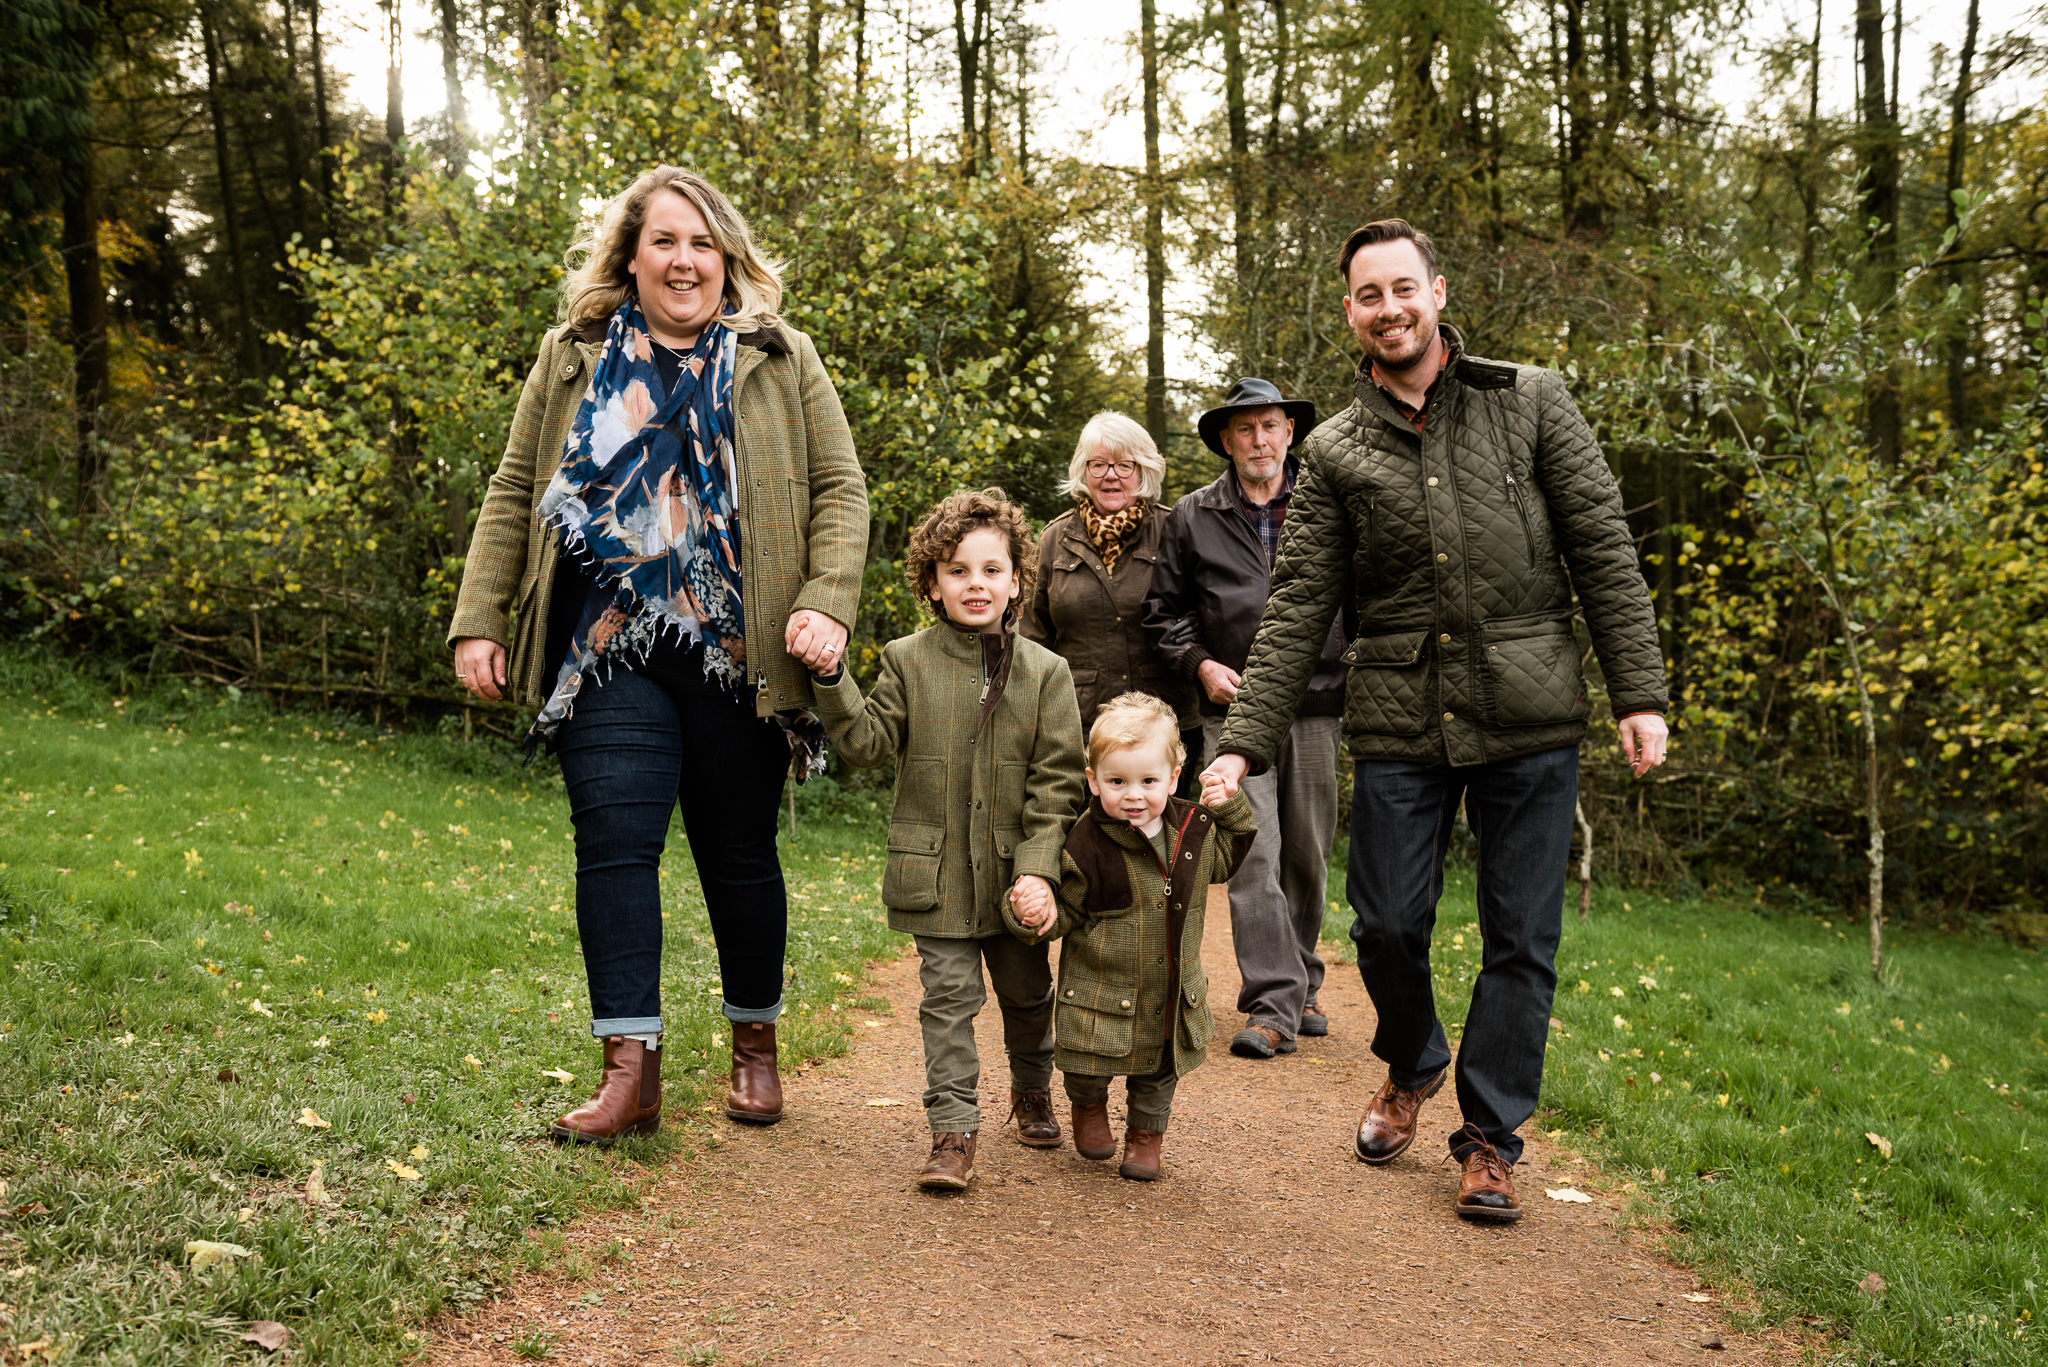 Autumn Documentary Lifestyle Family Photography at Clent Hills, Worcestershire Country Park countryside outdoors nature - Jenny Harper-9.jpg